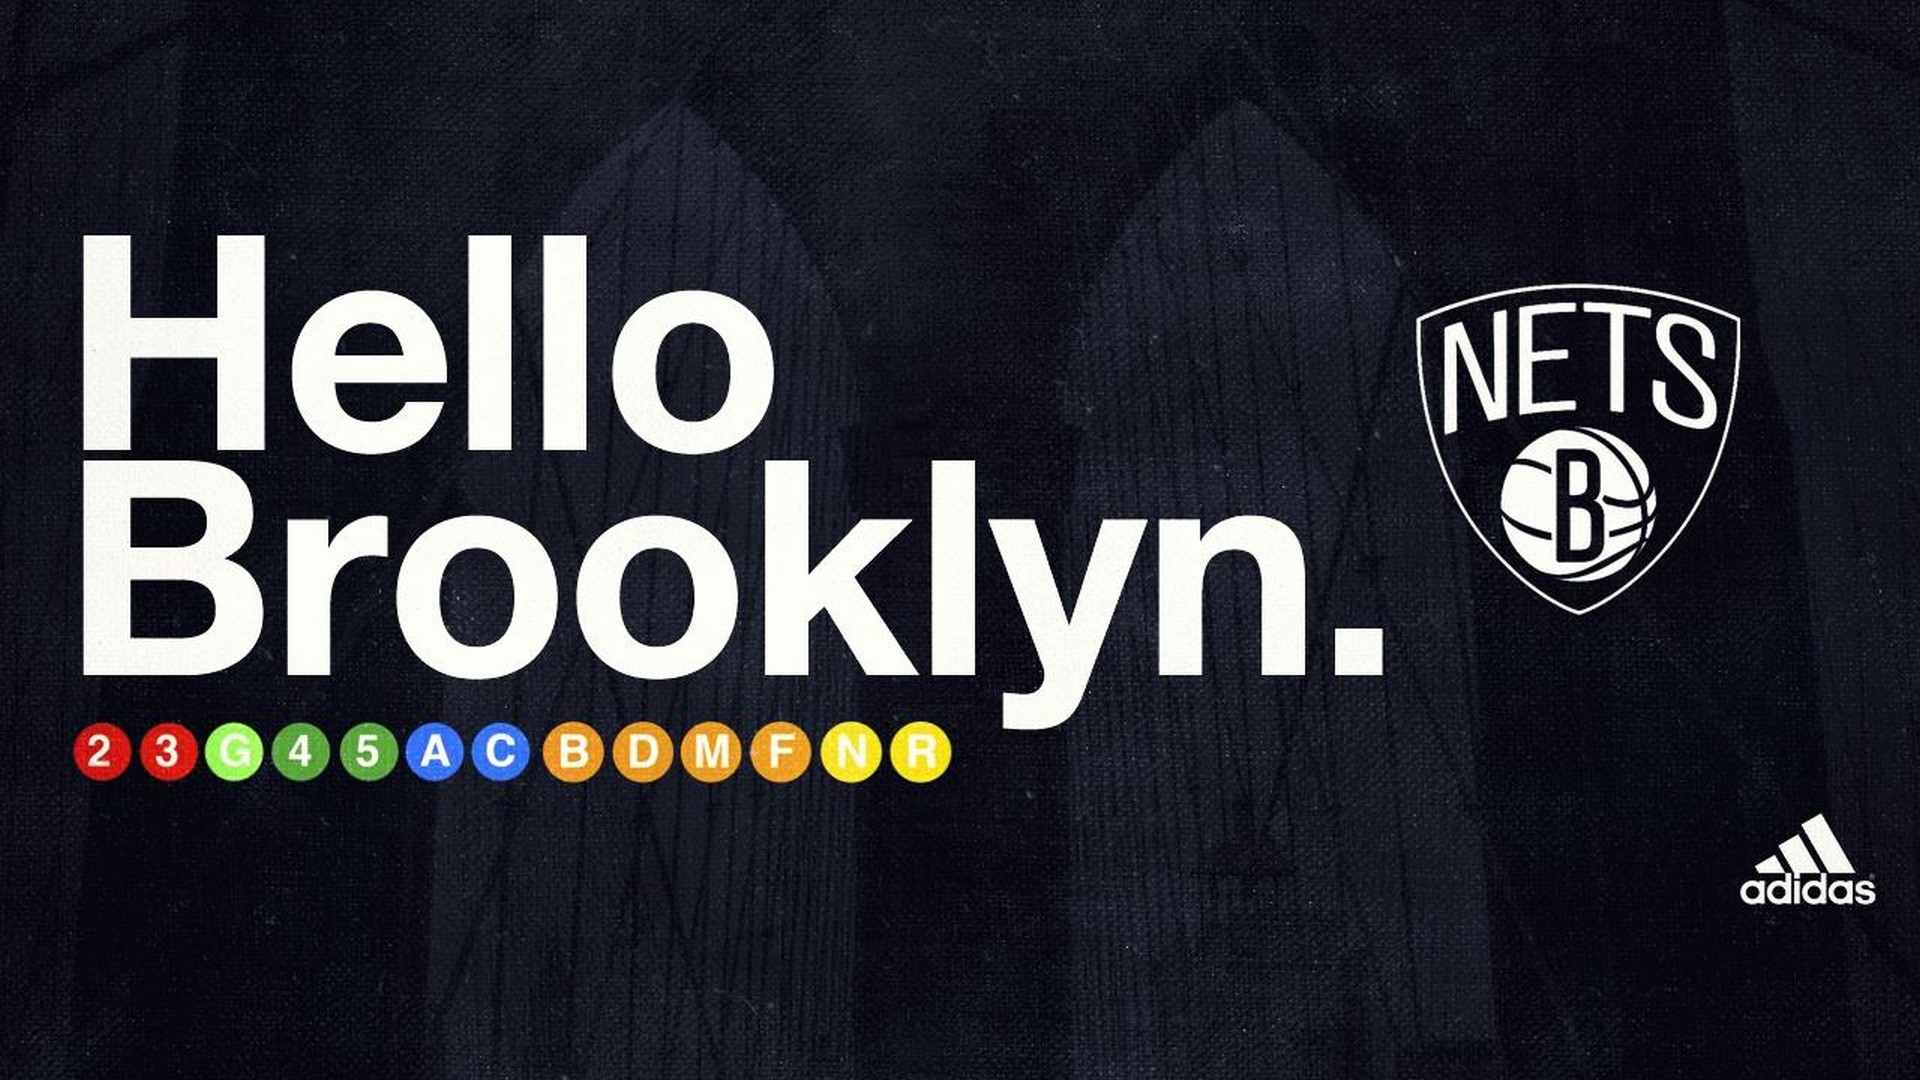 Brooklyn Nets HD Wallpapers with image dimensions 1920x1080 pixel. You can make this wallpaper for your Desktop Computer Backgrounds, Windows or Mac Screensavers, iPhone Lock screen, Tablet or Android and another Mobile Phone device